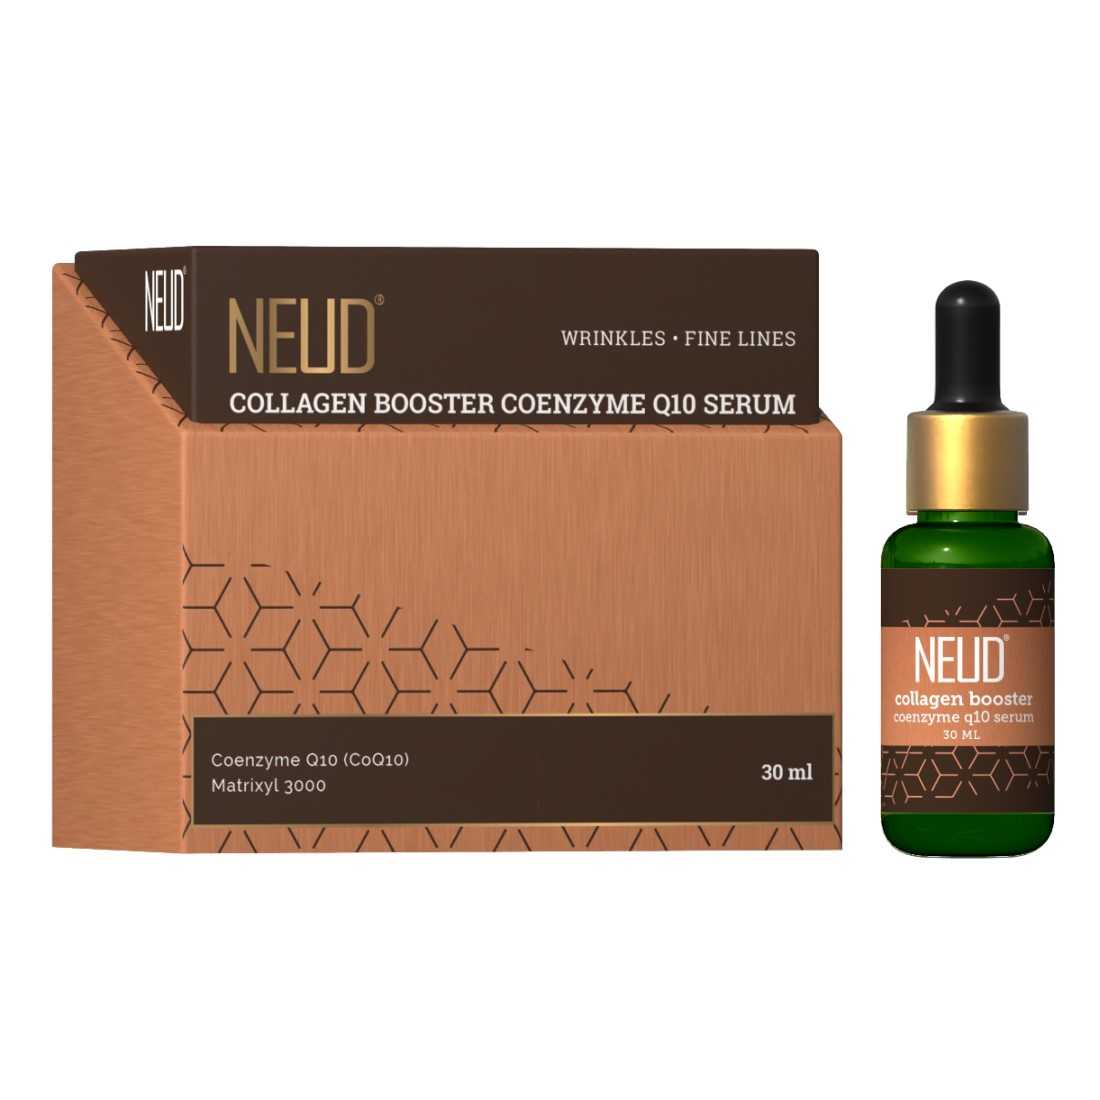 NEUD Collagen Booster Coenzyme Q10 Serum With Matrixyl 3000 and Aloe Vera - 30 ml